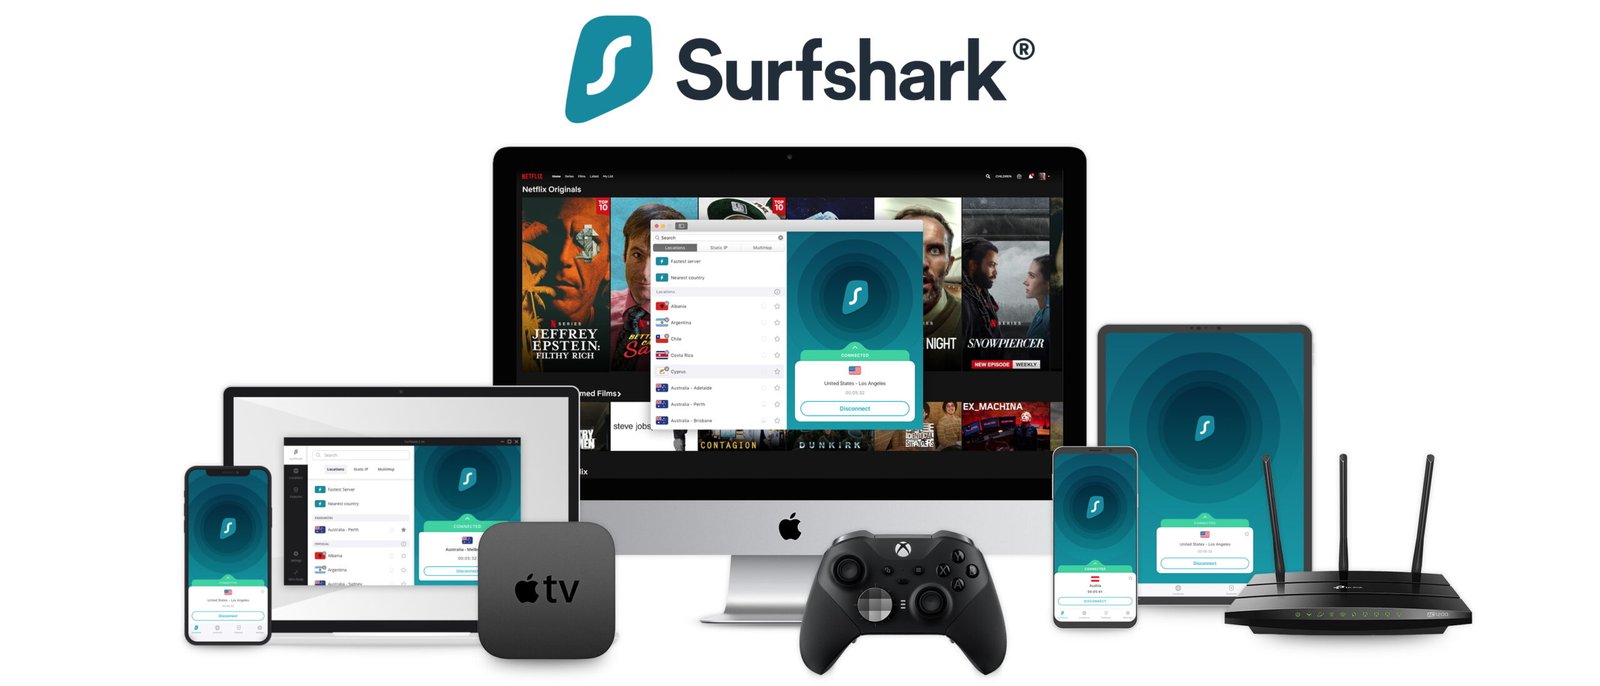 SurfShark VPN Full Review – A Detailed Review and Analysis